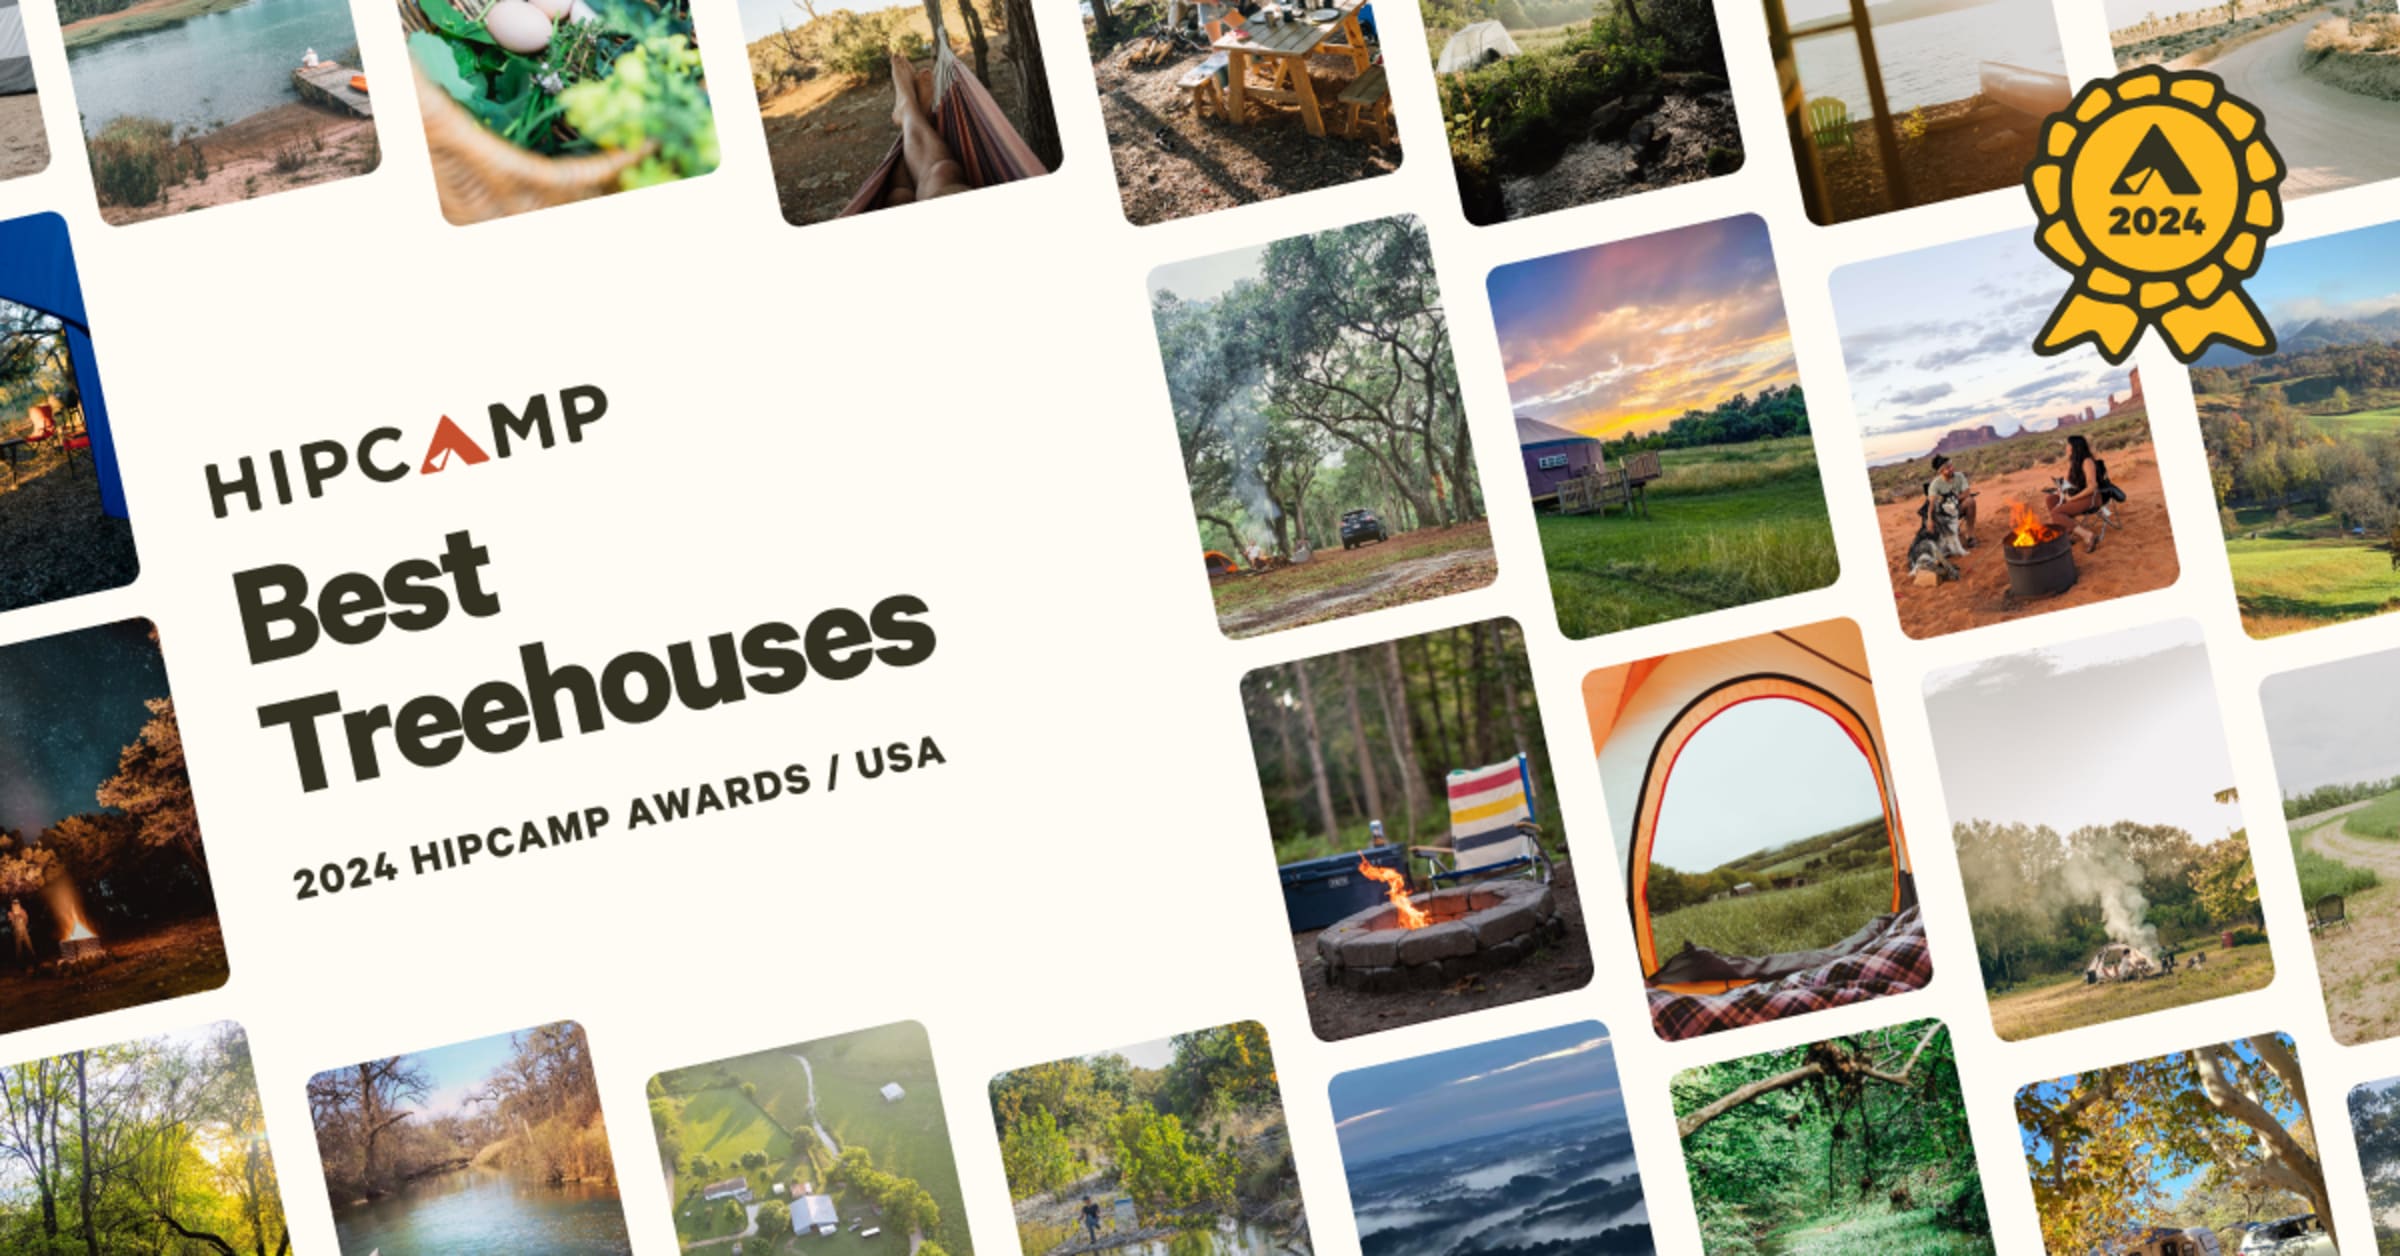 Hipcamp Awards 2024: Best Treehouses in the US